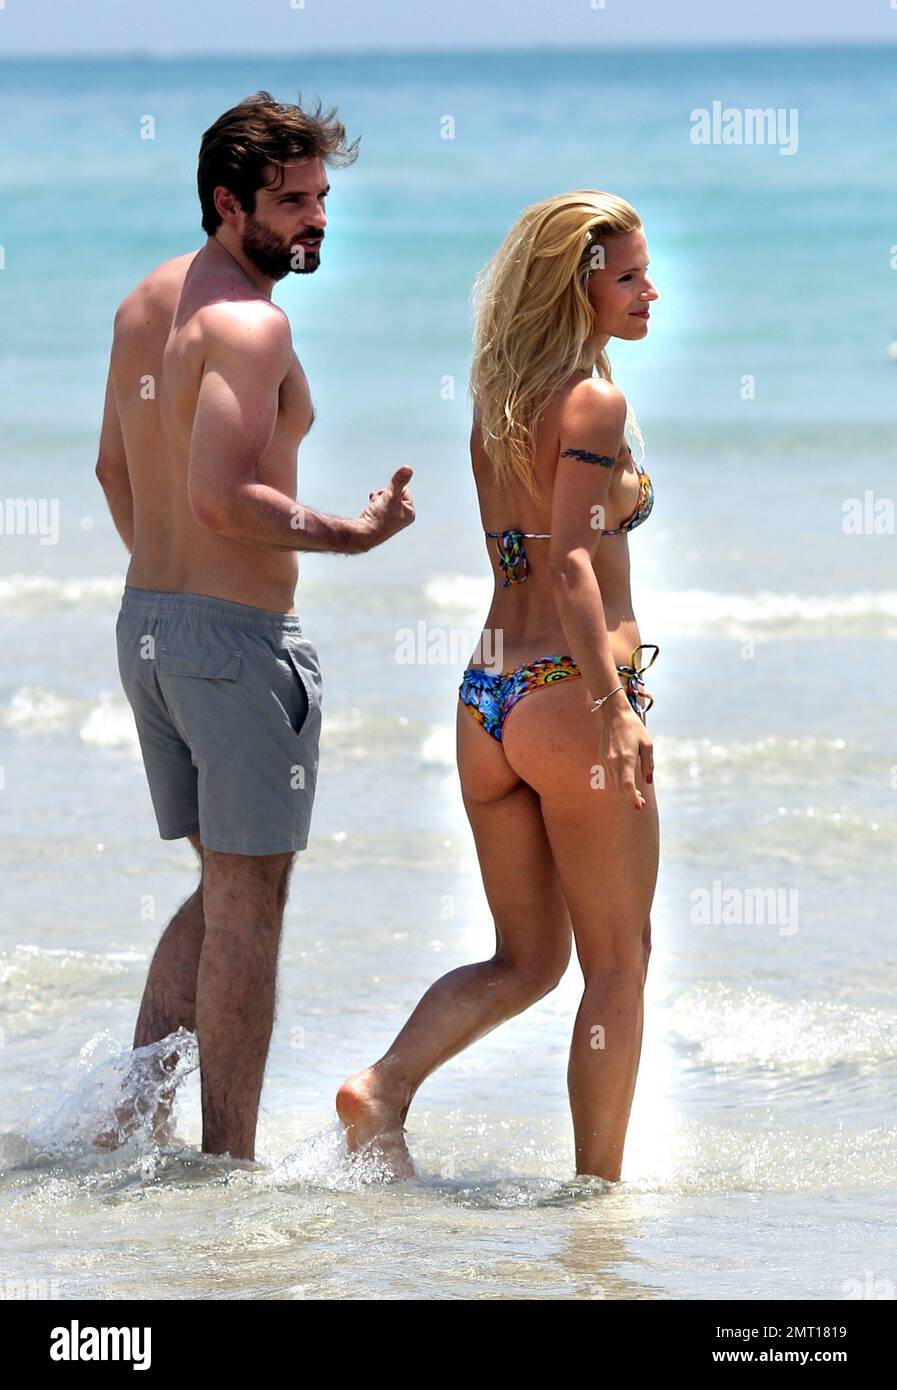 Swiss TV host and actress Michelle Hunziker spends the day in Miami Beach with boyfriend Tomaso Trussardi. 35 year old Hunziker wore a multi-color string bikini that showed off her amazing toned figure. The couple were seen taking a dip in the ocean and happily walking hand-in-hand. Miami Beach, FL. 3rd June 2012. Stock Photo